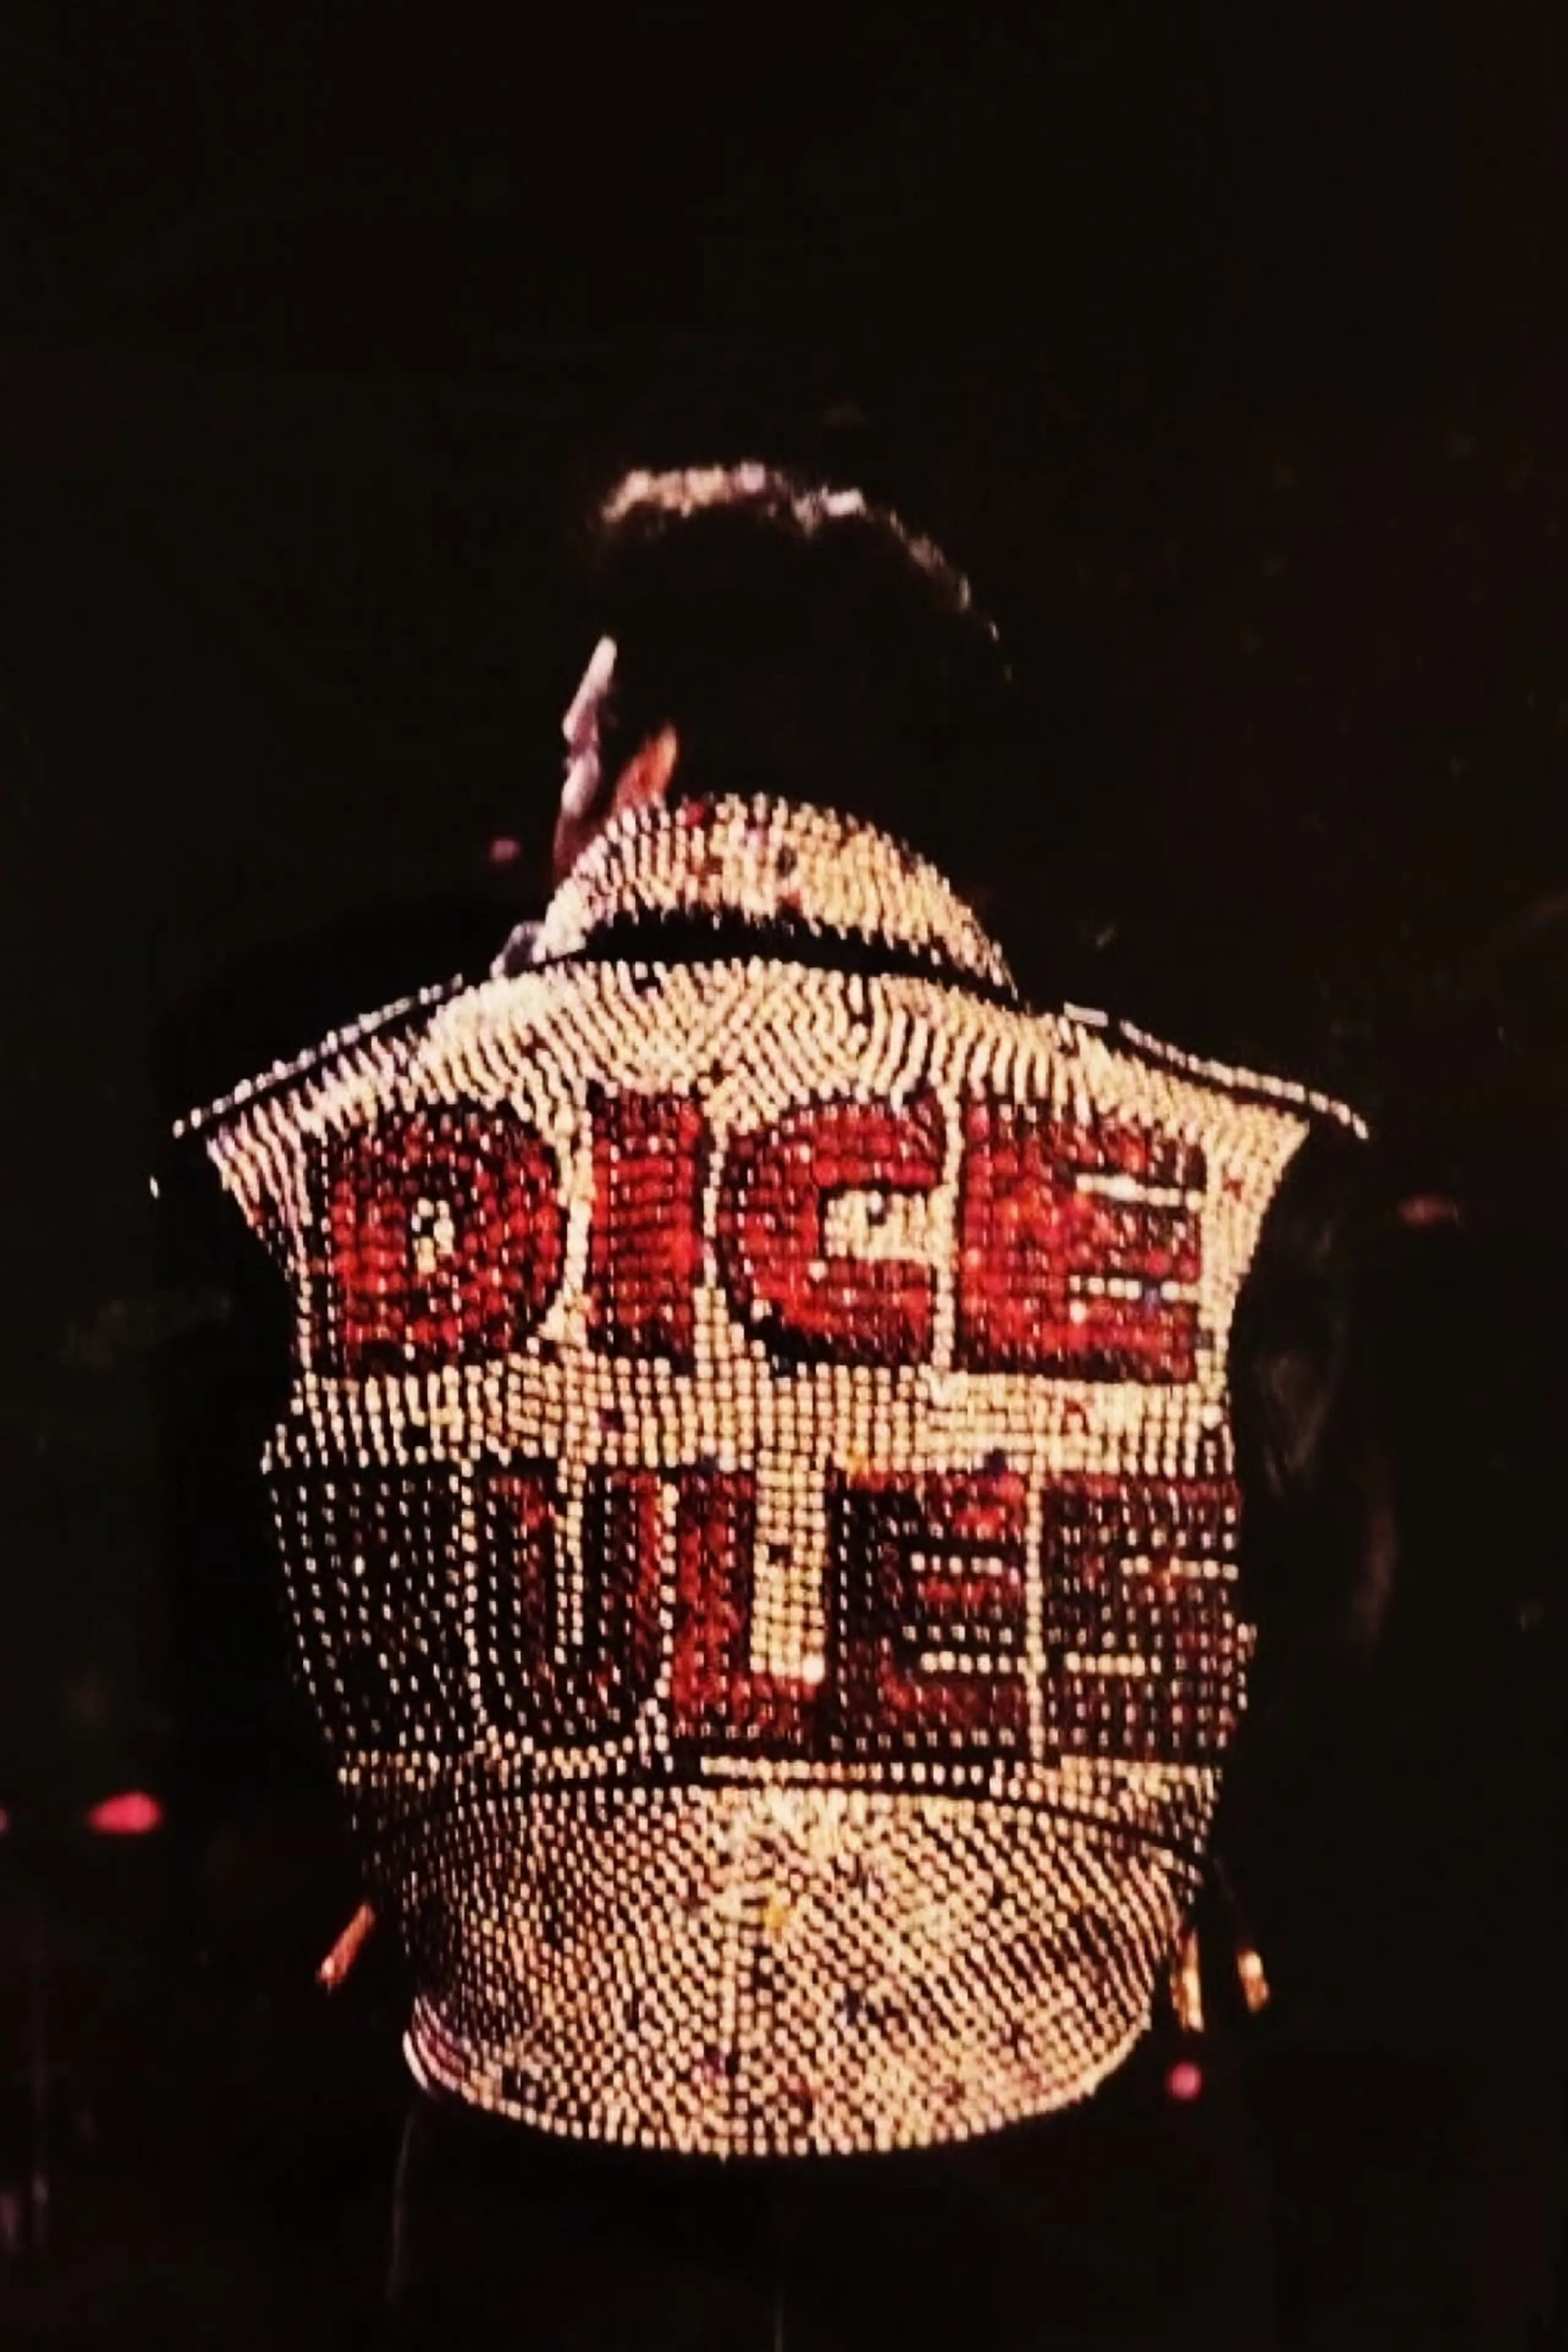 Andrew Dice Clay: Dice Rules